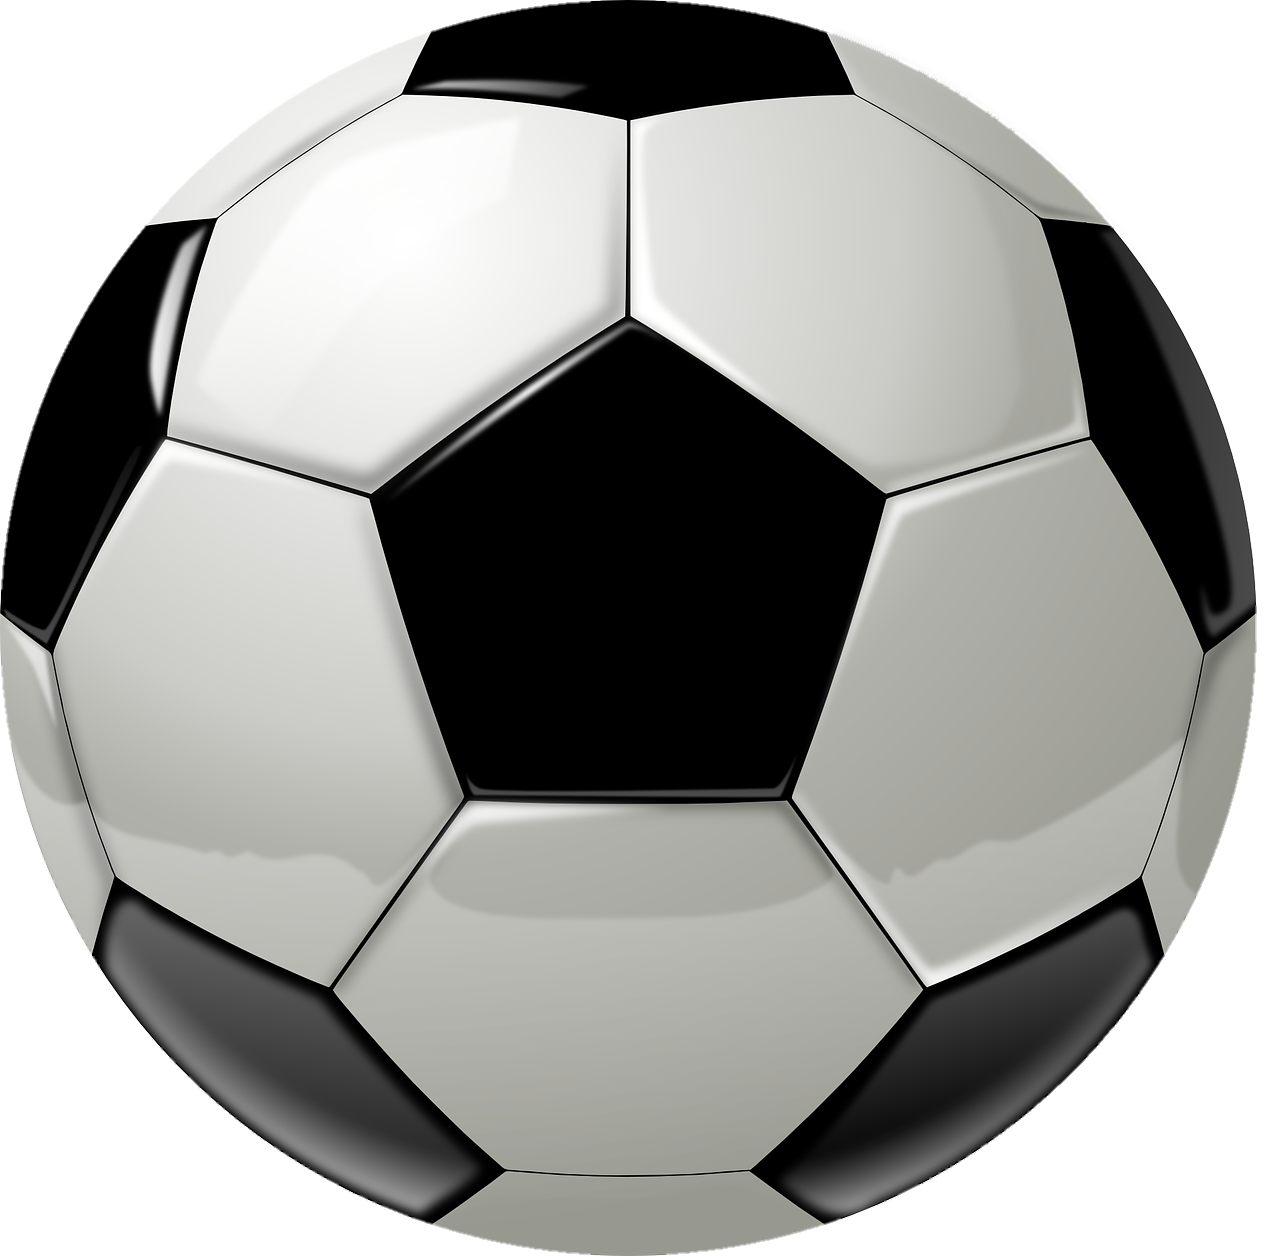 football-png-image-from-pngfre-6